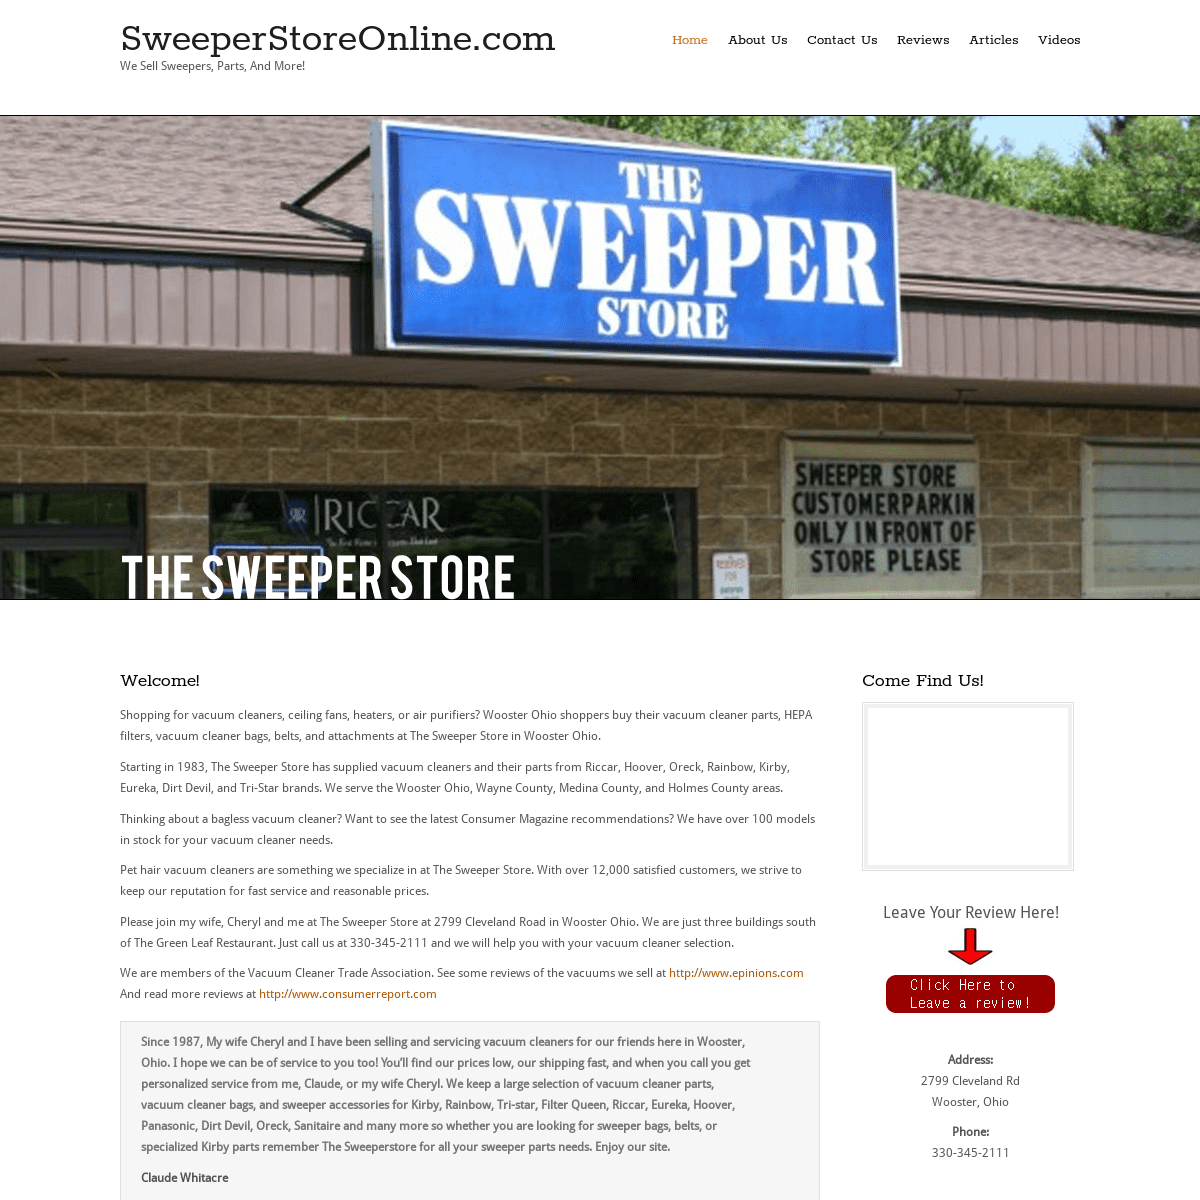 A complete backup of https://sweeperstoreonline.com